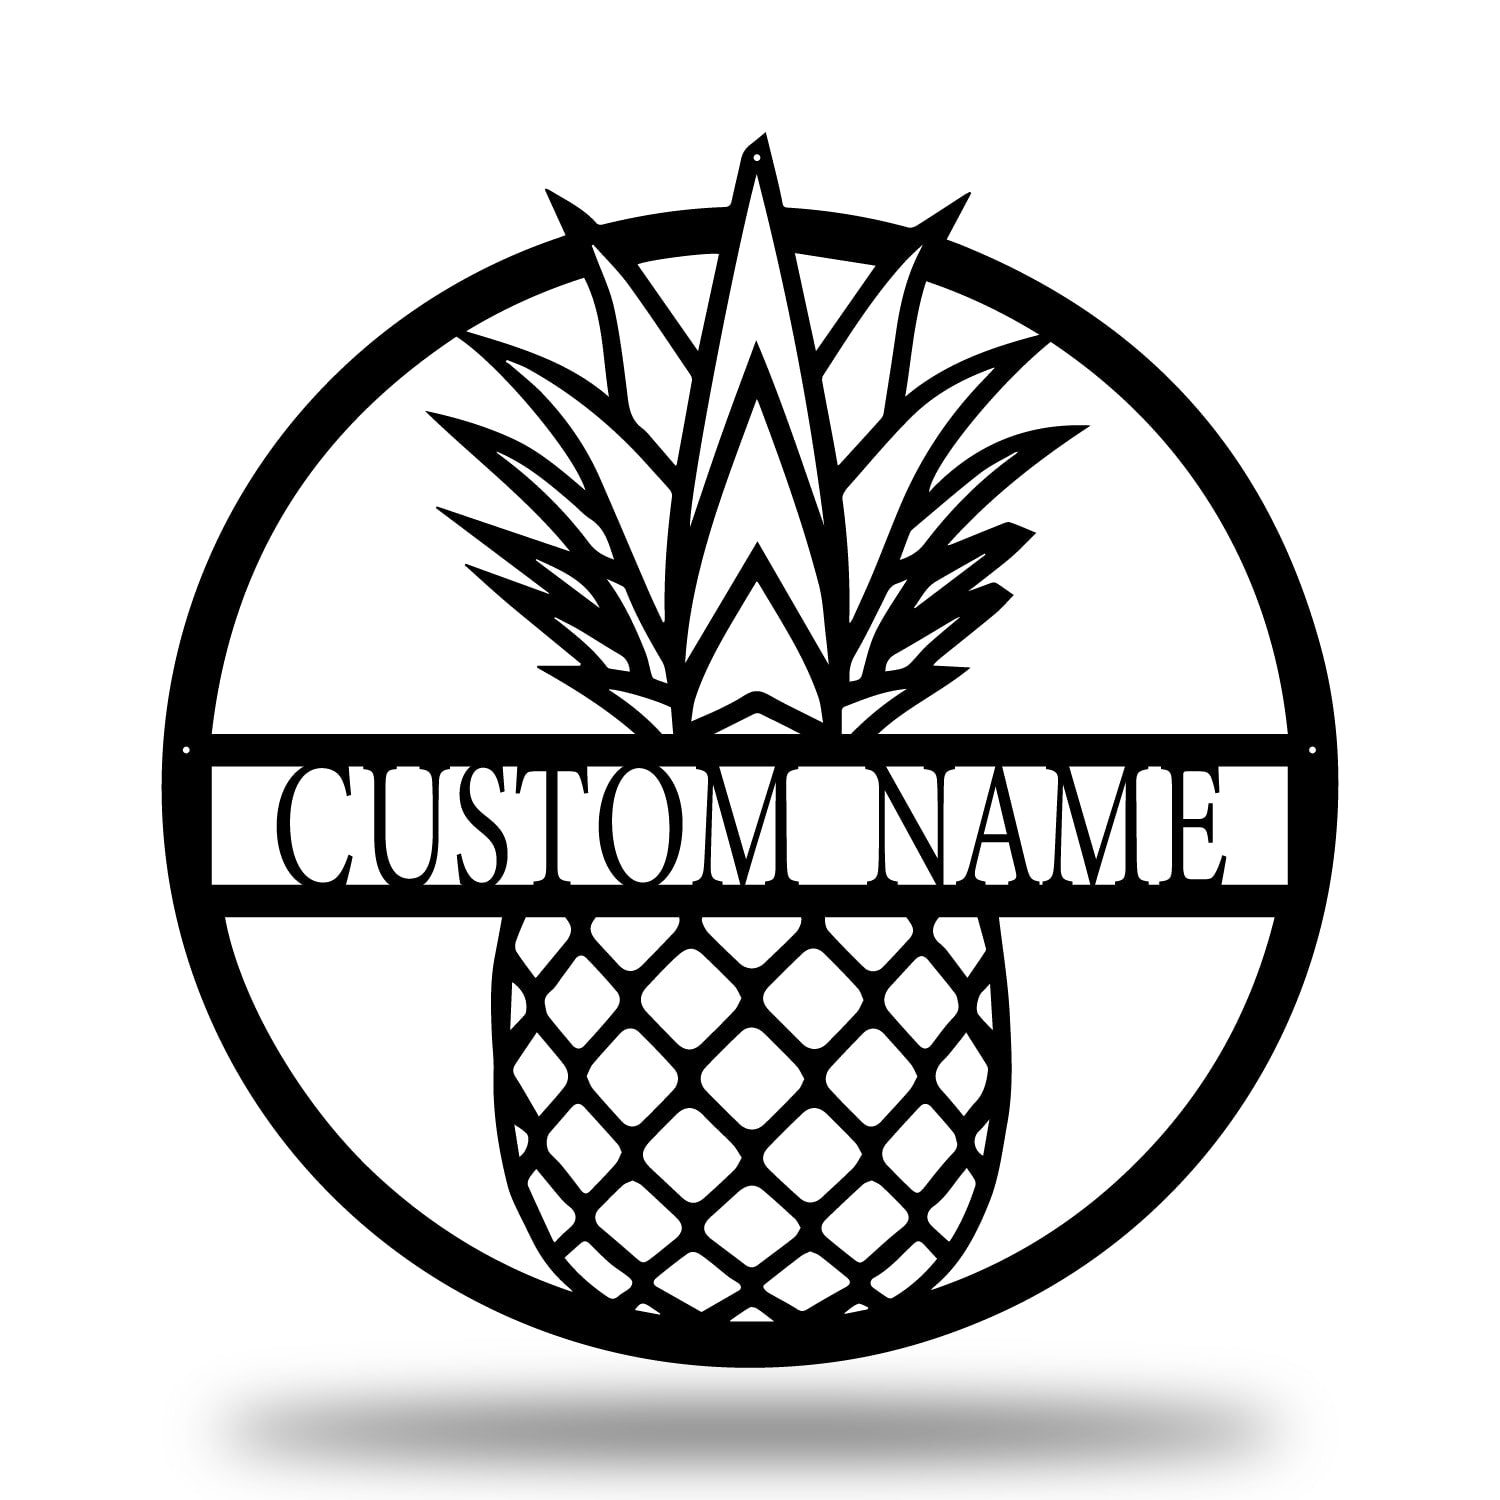 Personalized Pineapple Metal Sign - Pineapple Monogram - Wall Decor Metal Art - Metal Signs For Home